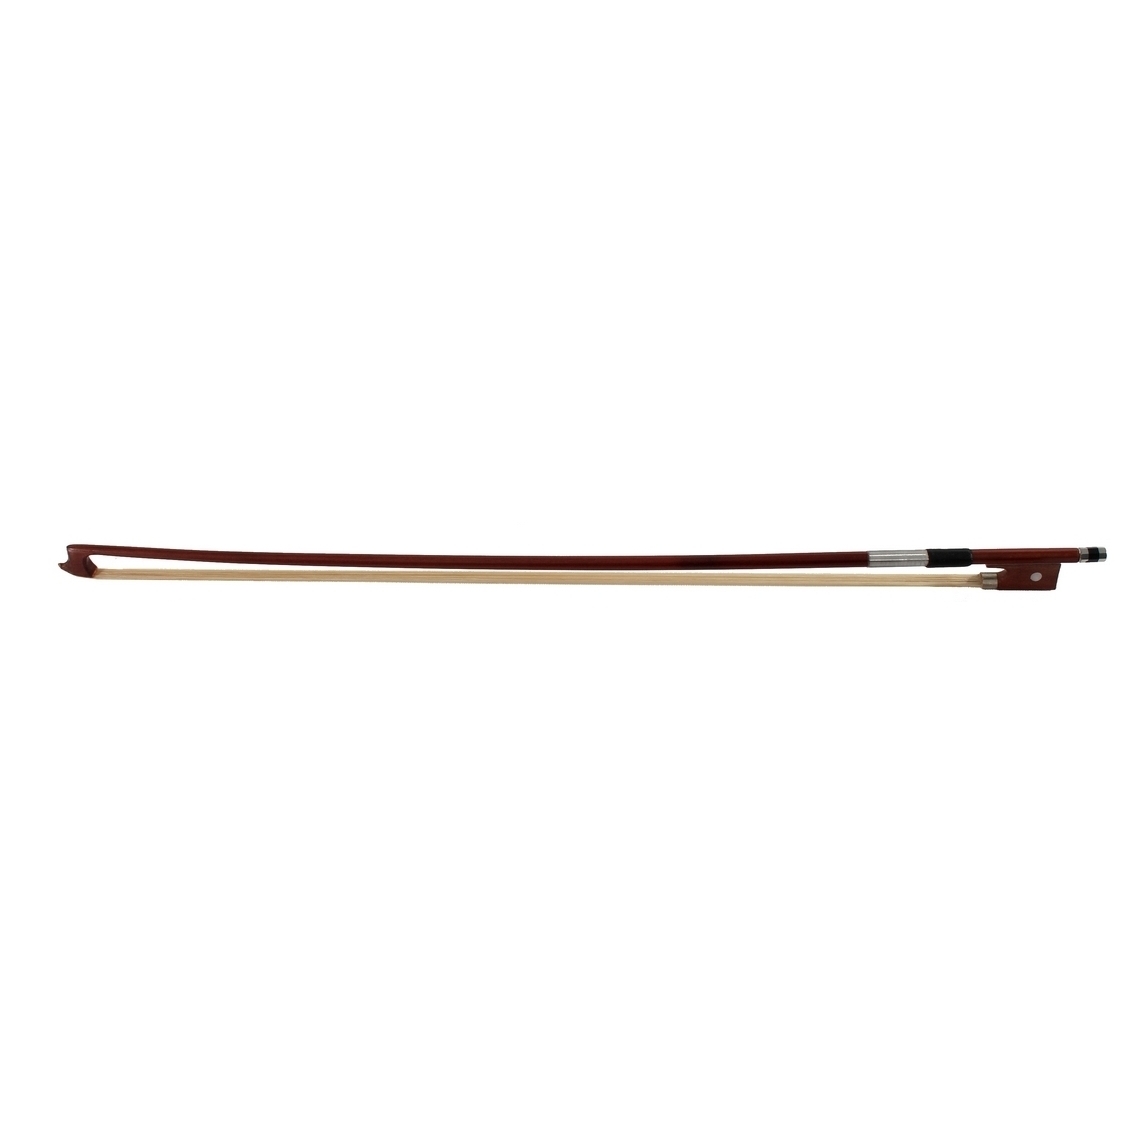 SOUNDSATION AT-10VC 3/4 Cello Bow